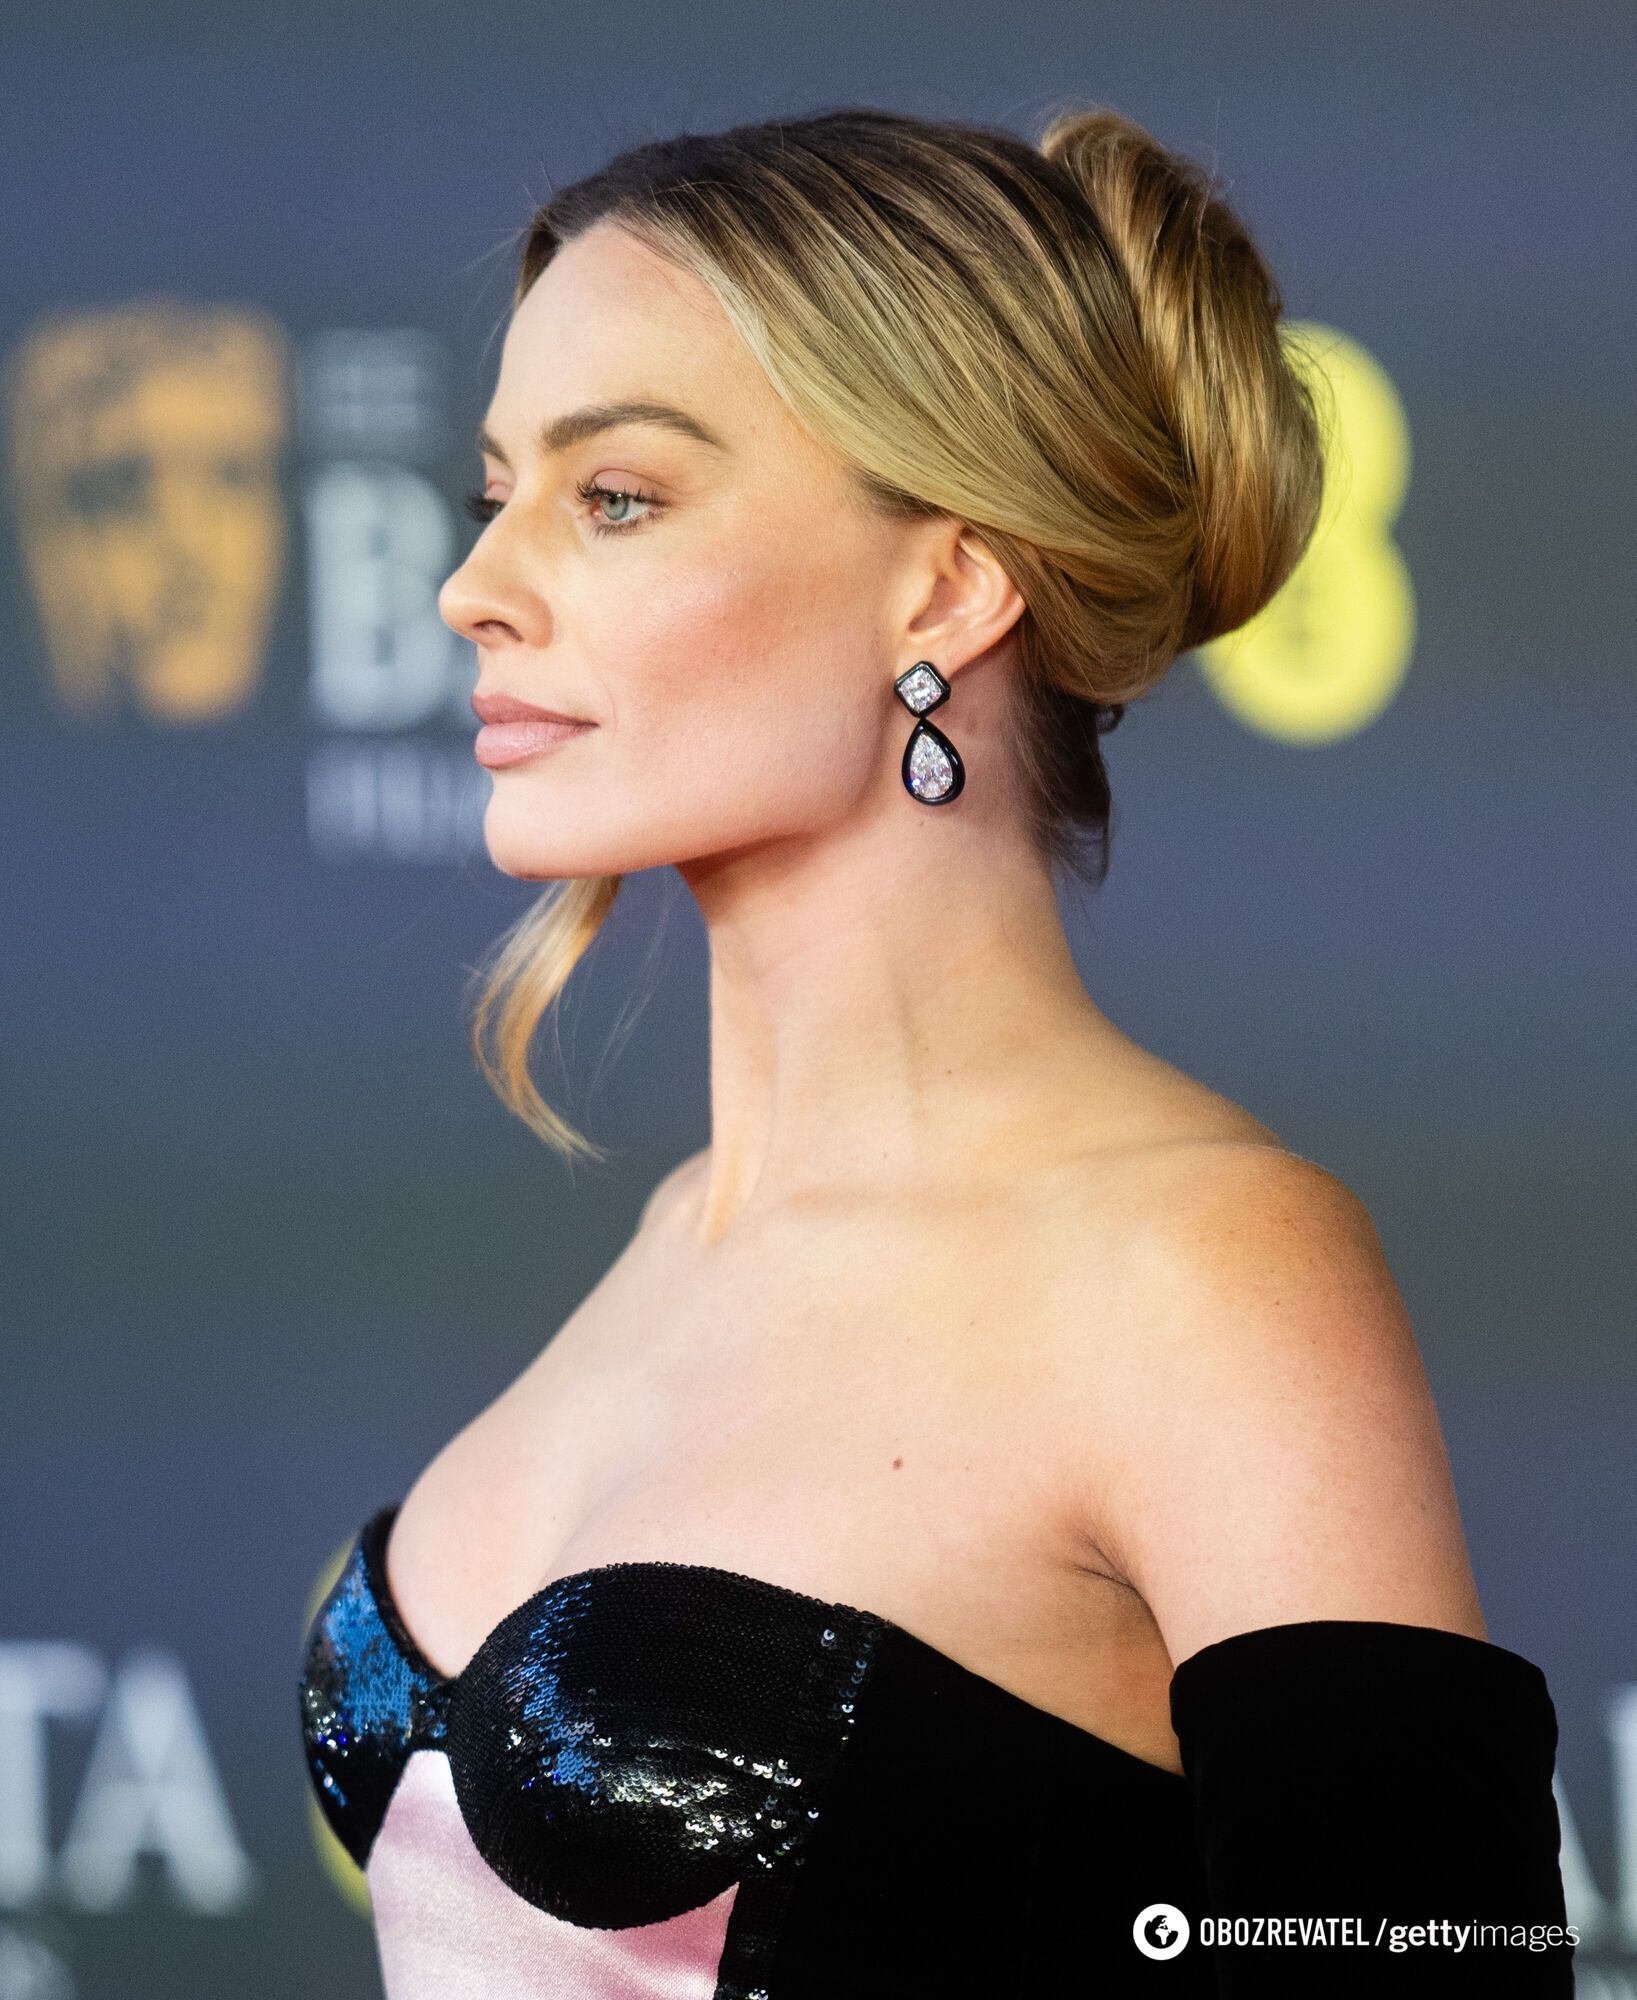 5 most spectacular looks of Margot Robbie in which she came for an award, but others won